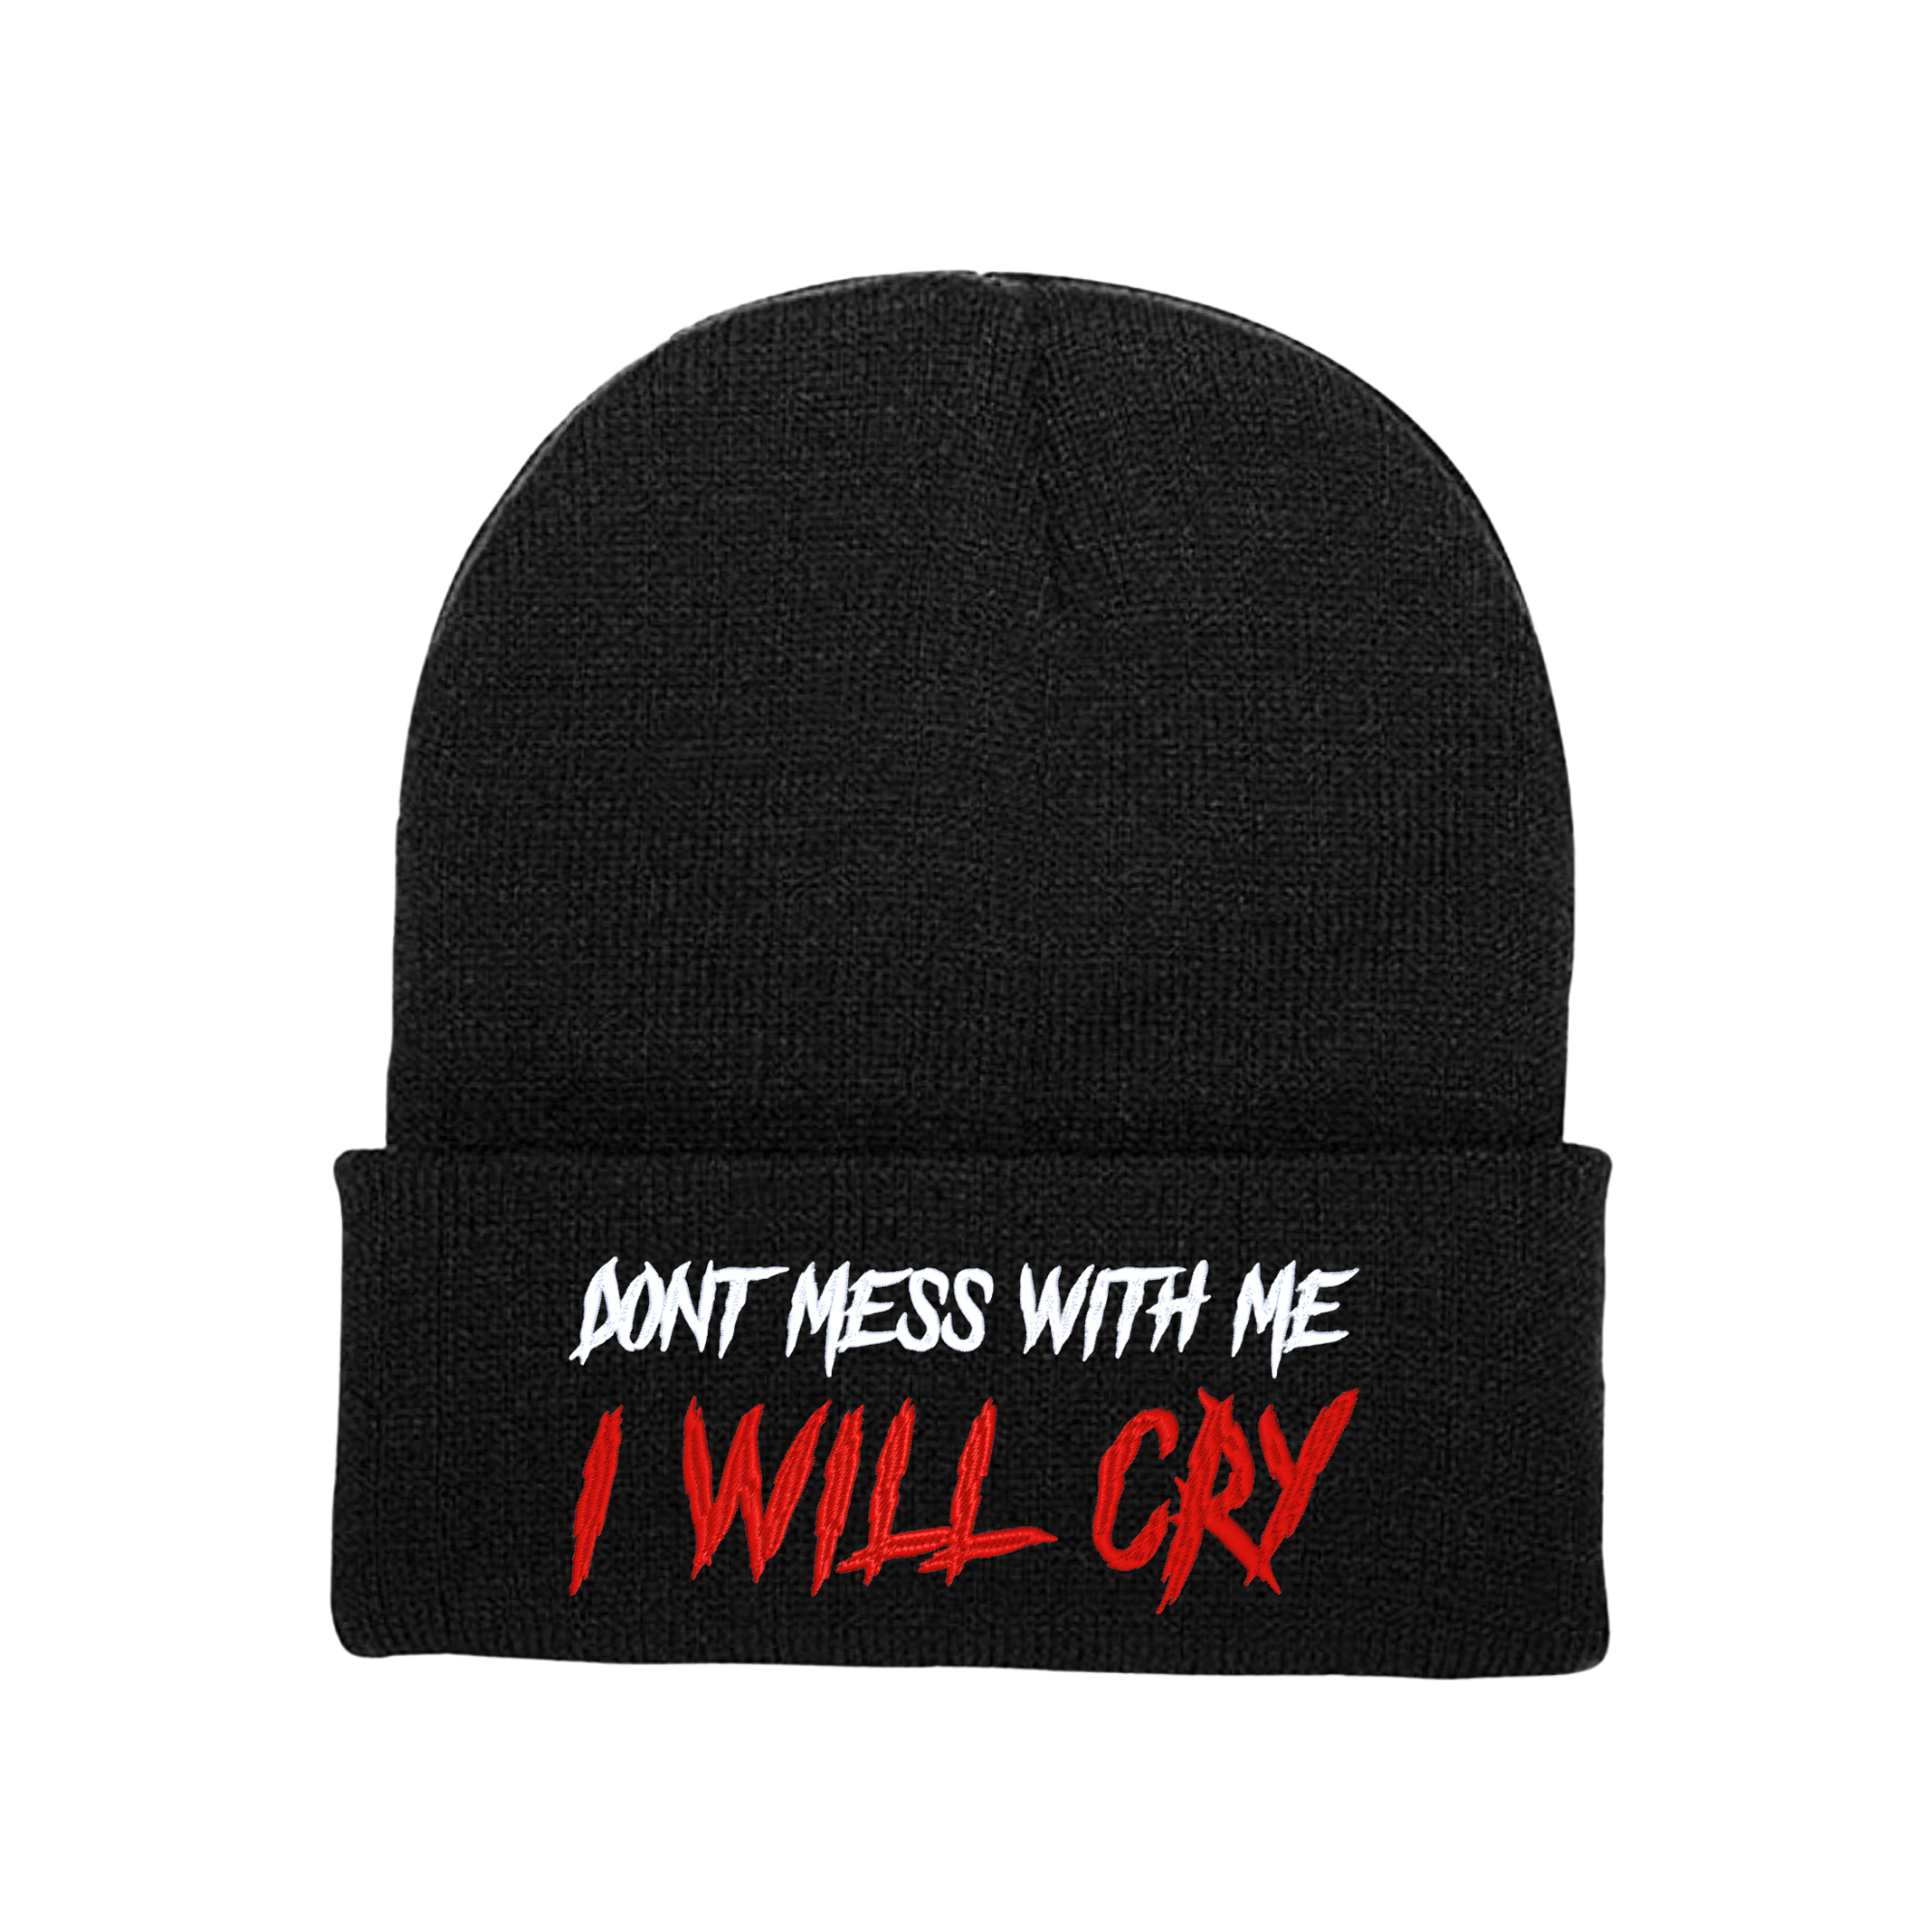 Don’t Mess With Me I Will Cry Embroidered Beanie Hat, One Size Fits All